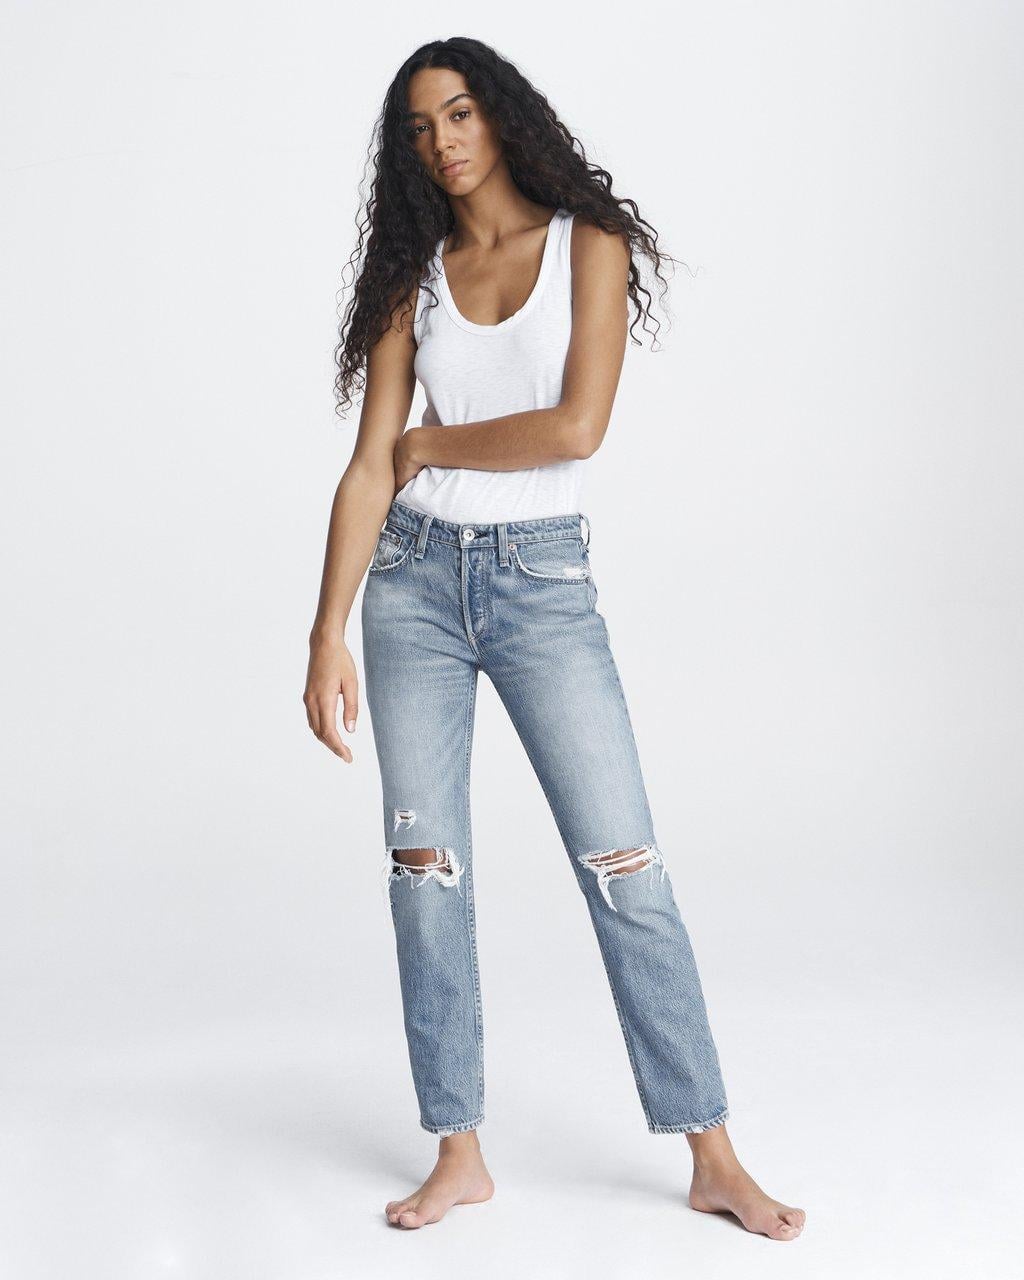 High Waisted Jeans - Buy High Waisted Jeans online in India